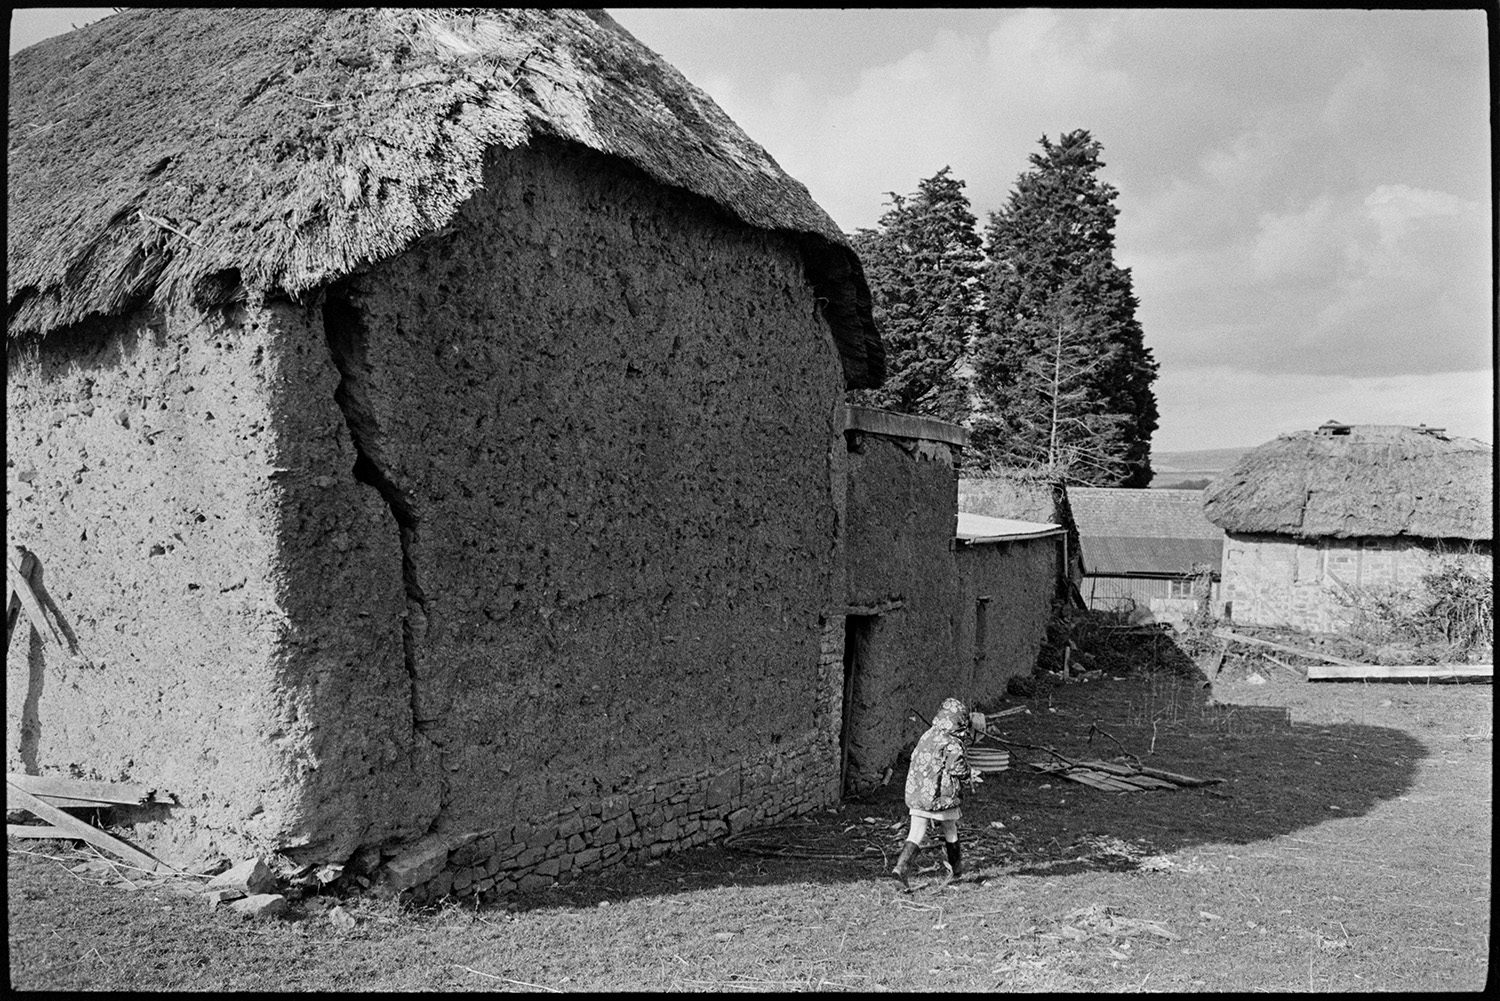 Cob and thatch barn, collapsing. 
[A child walking past a cob and thatch barn at Higher House Farm, Atherington. The wall of the barn has a large crack in it. Other barn buildings can be seen in the background.]